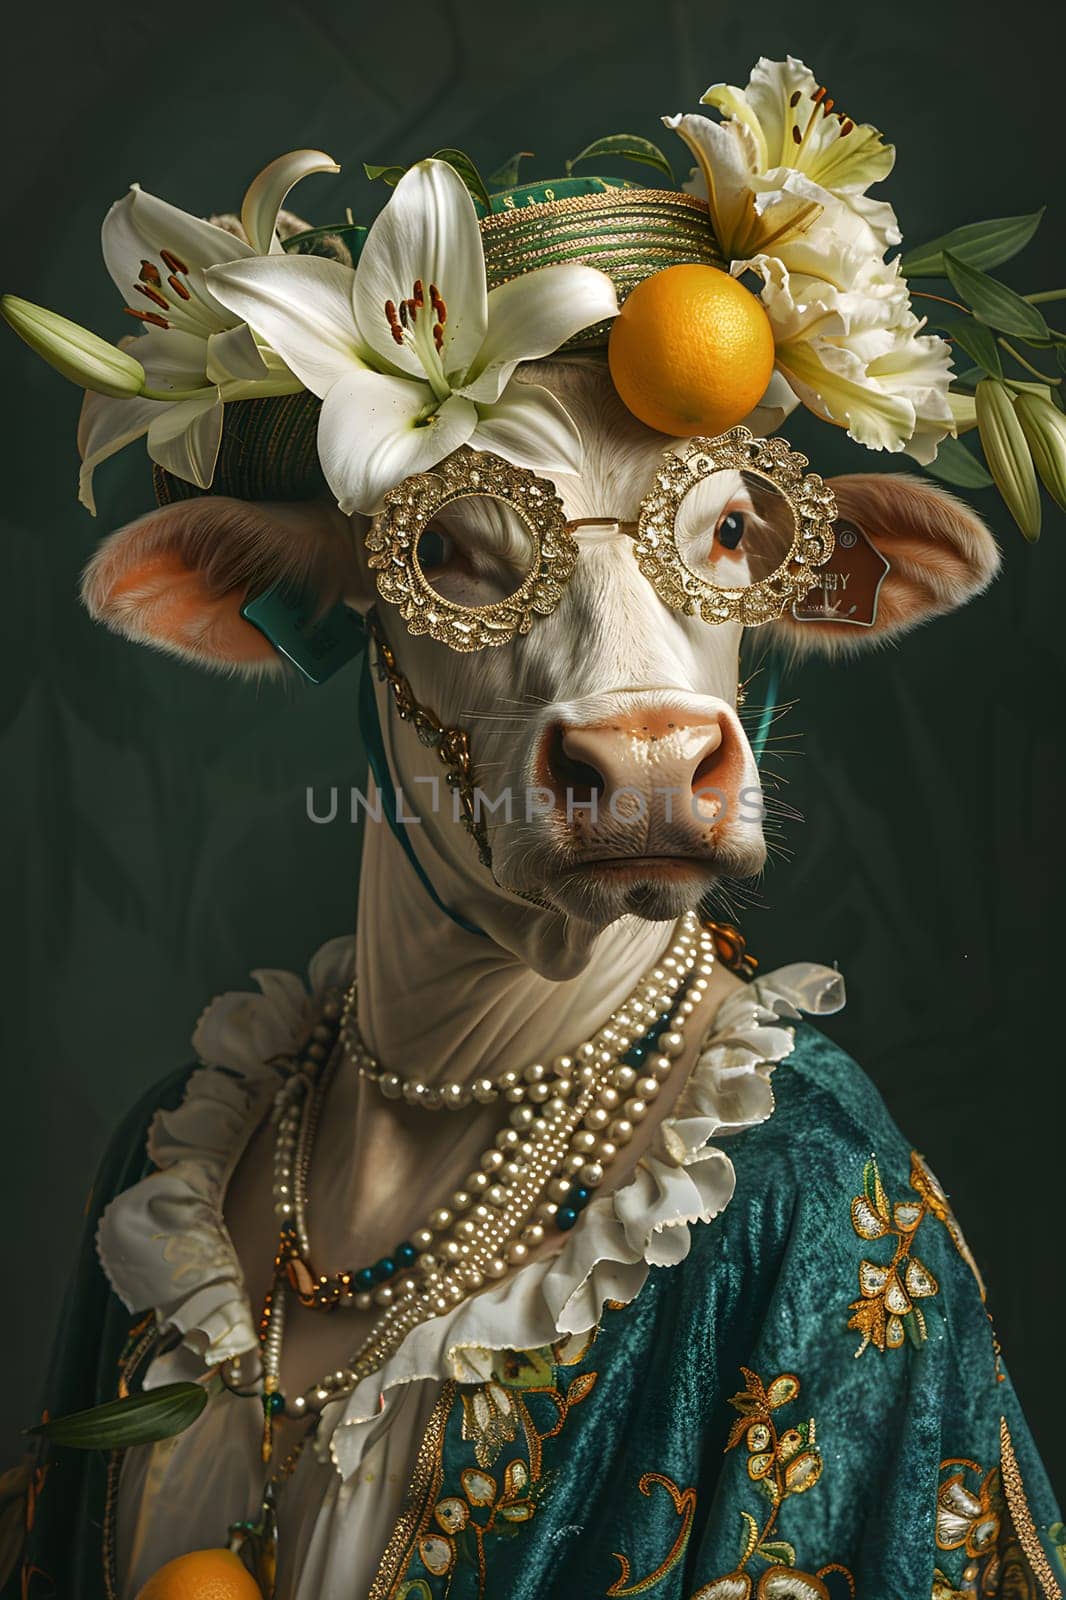 A cow dressed as a fictional character with a mask and pearl necklace by Nadtochiy